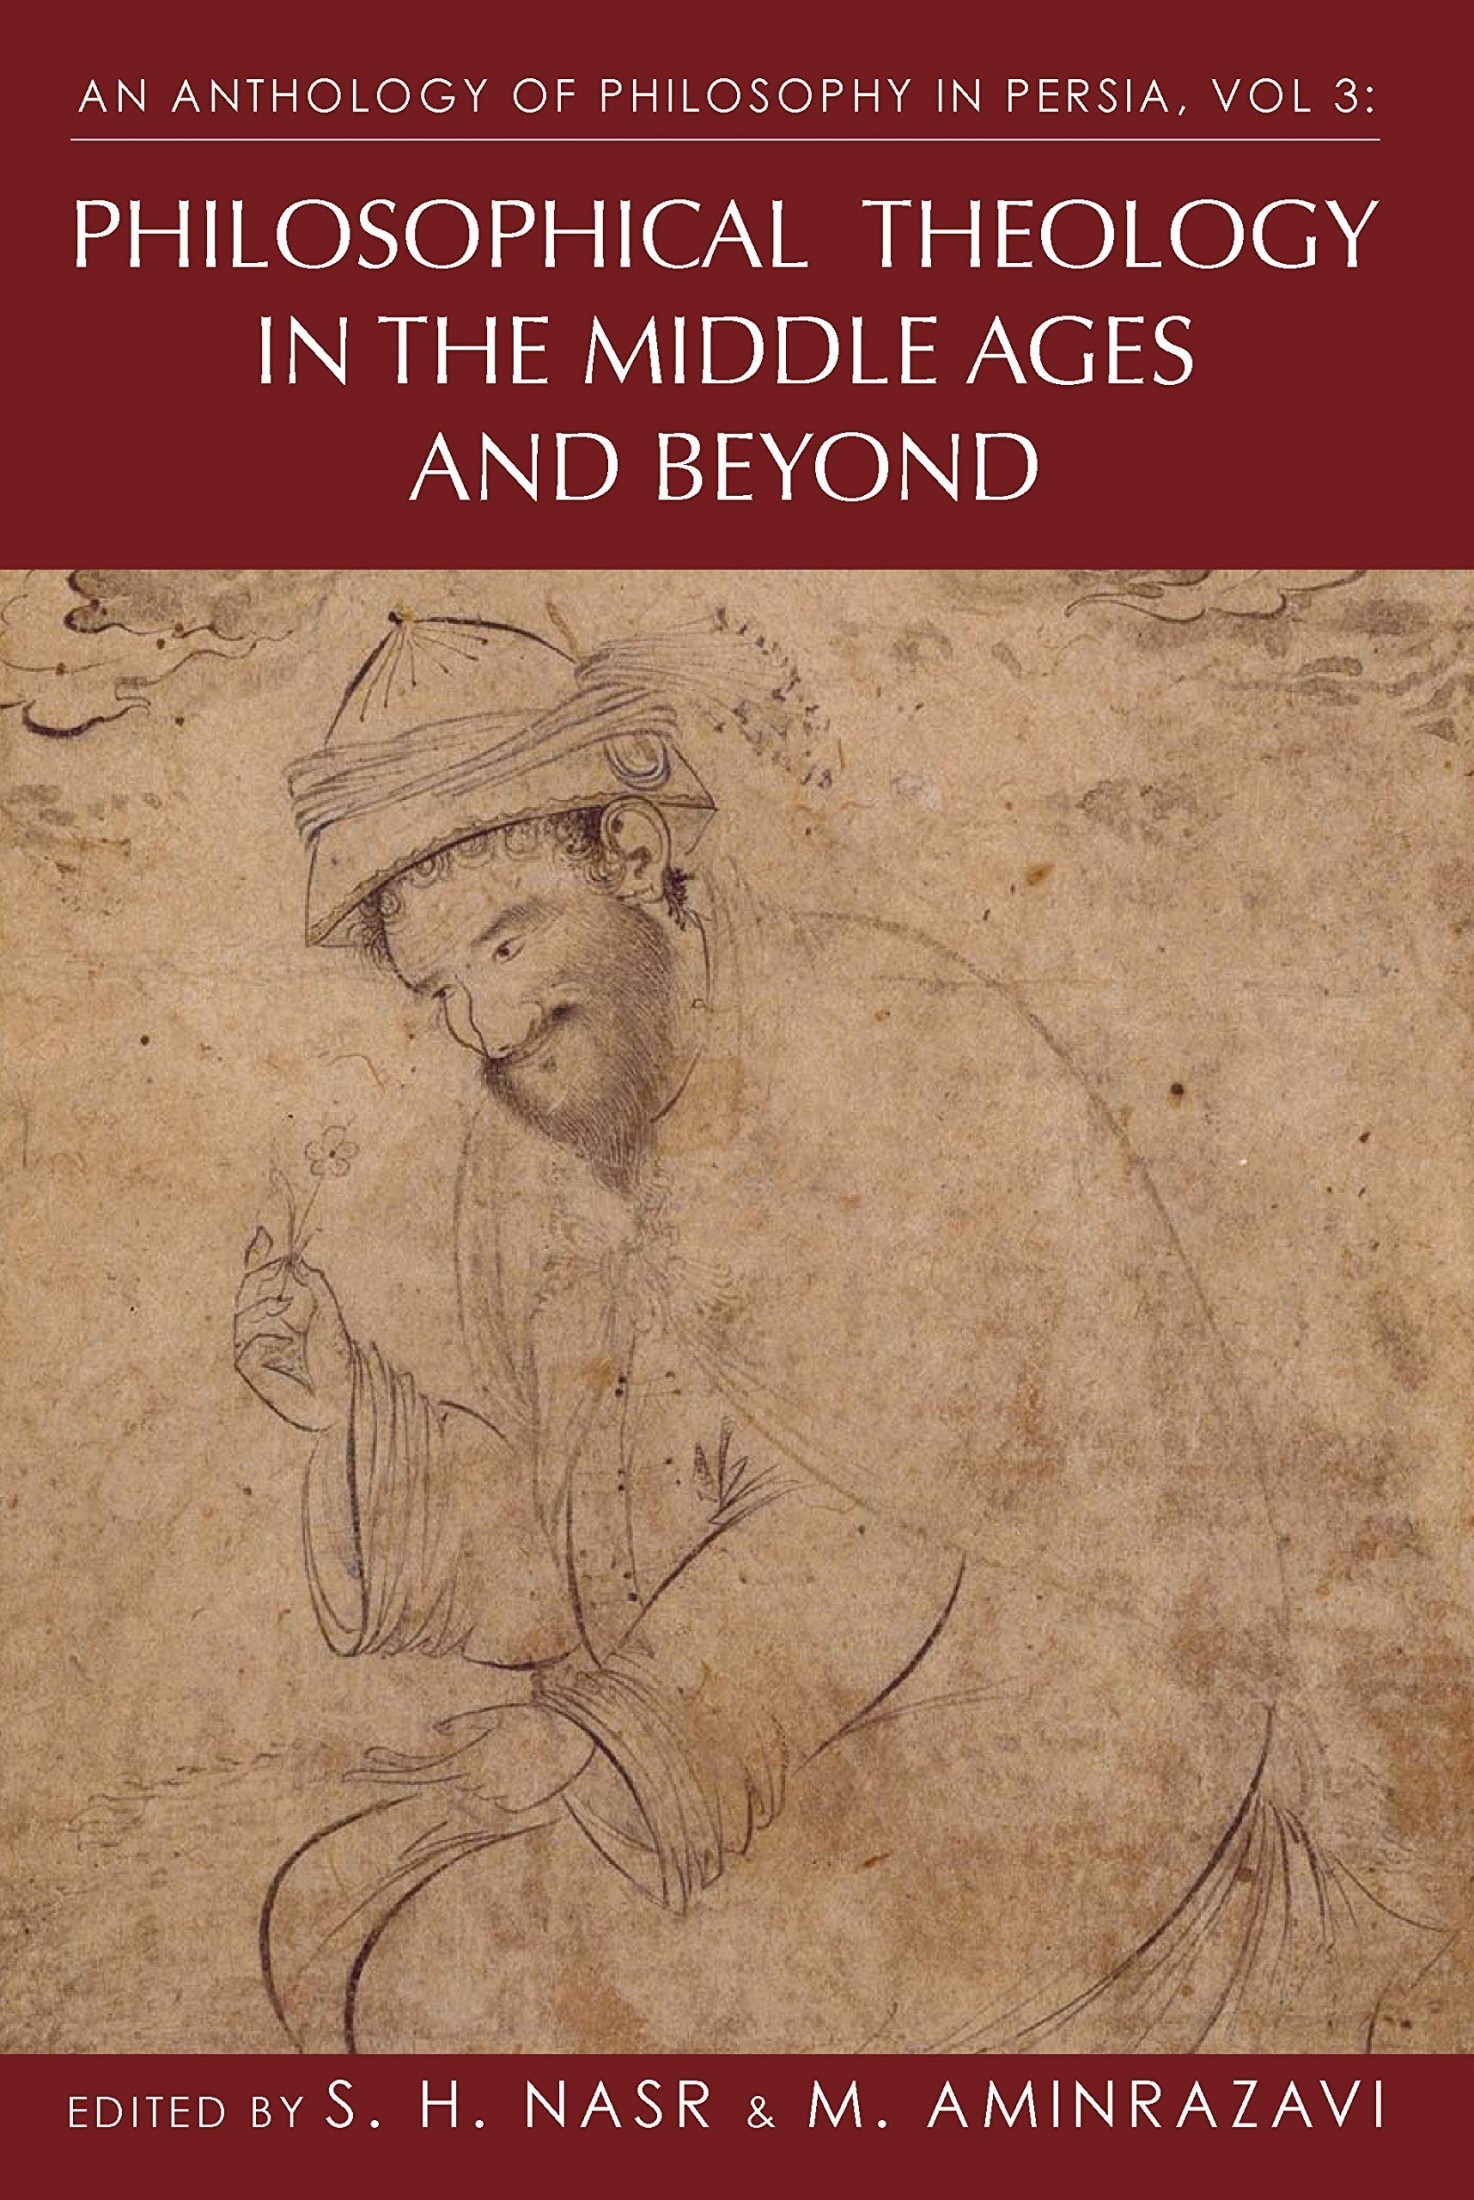 An Anthology of Philosophy in Persia, Vol. 3: Philosophical Theology in the Middle Ages and Beyond